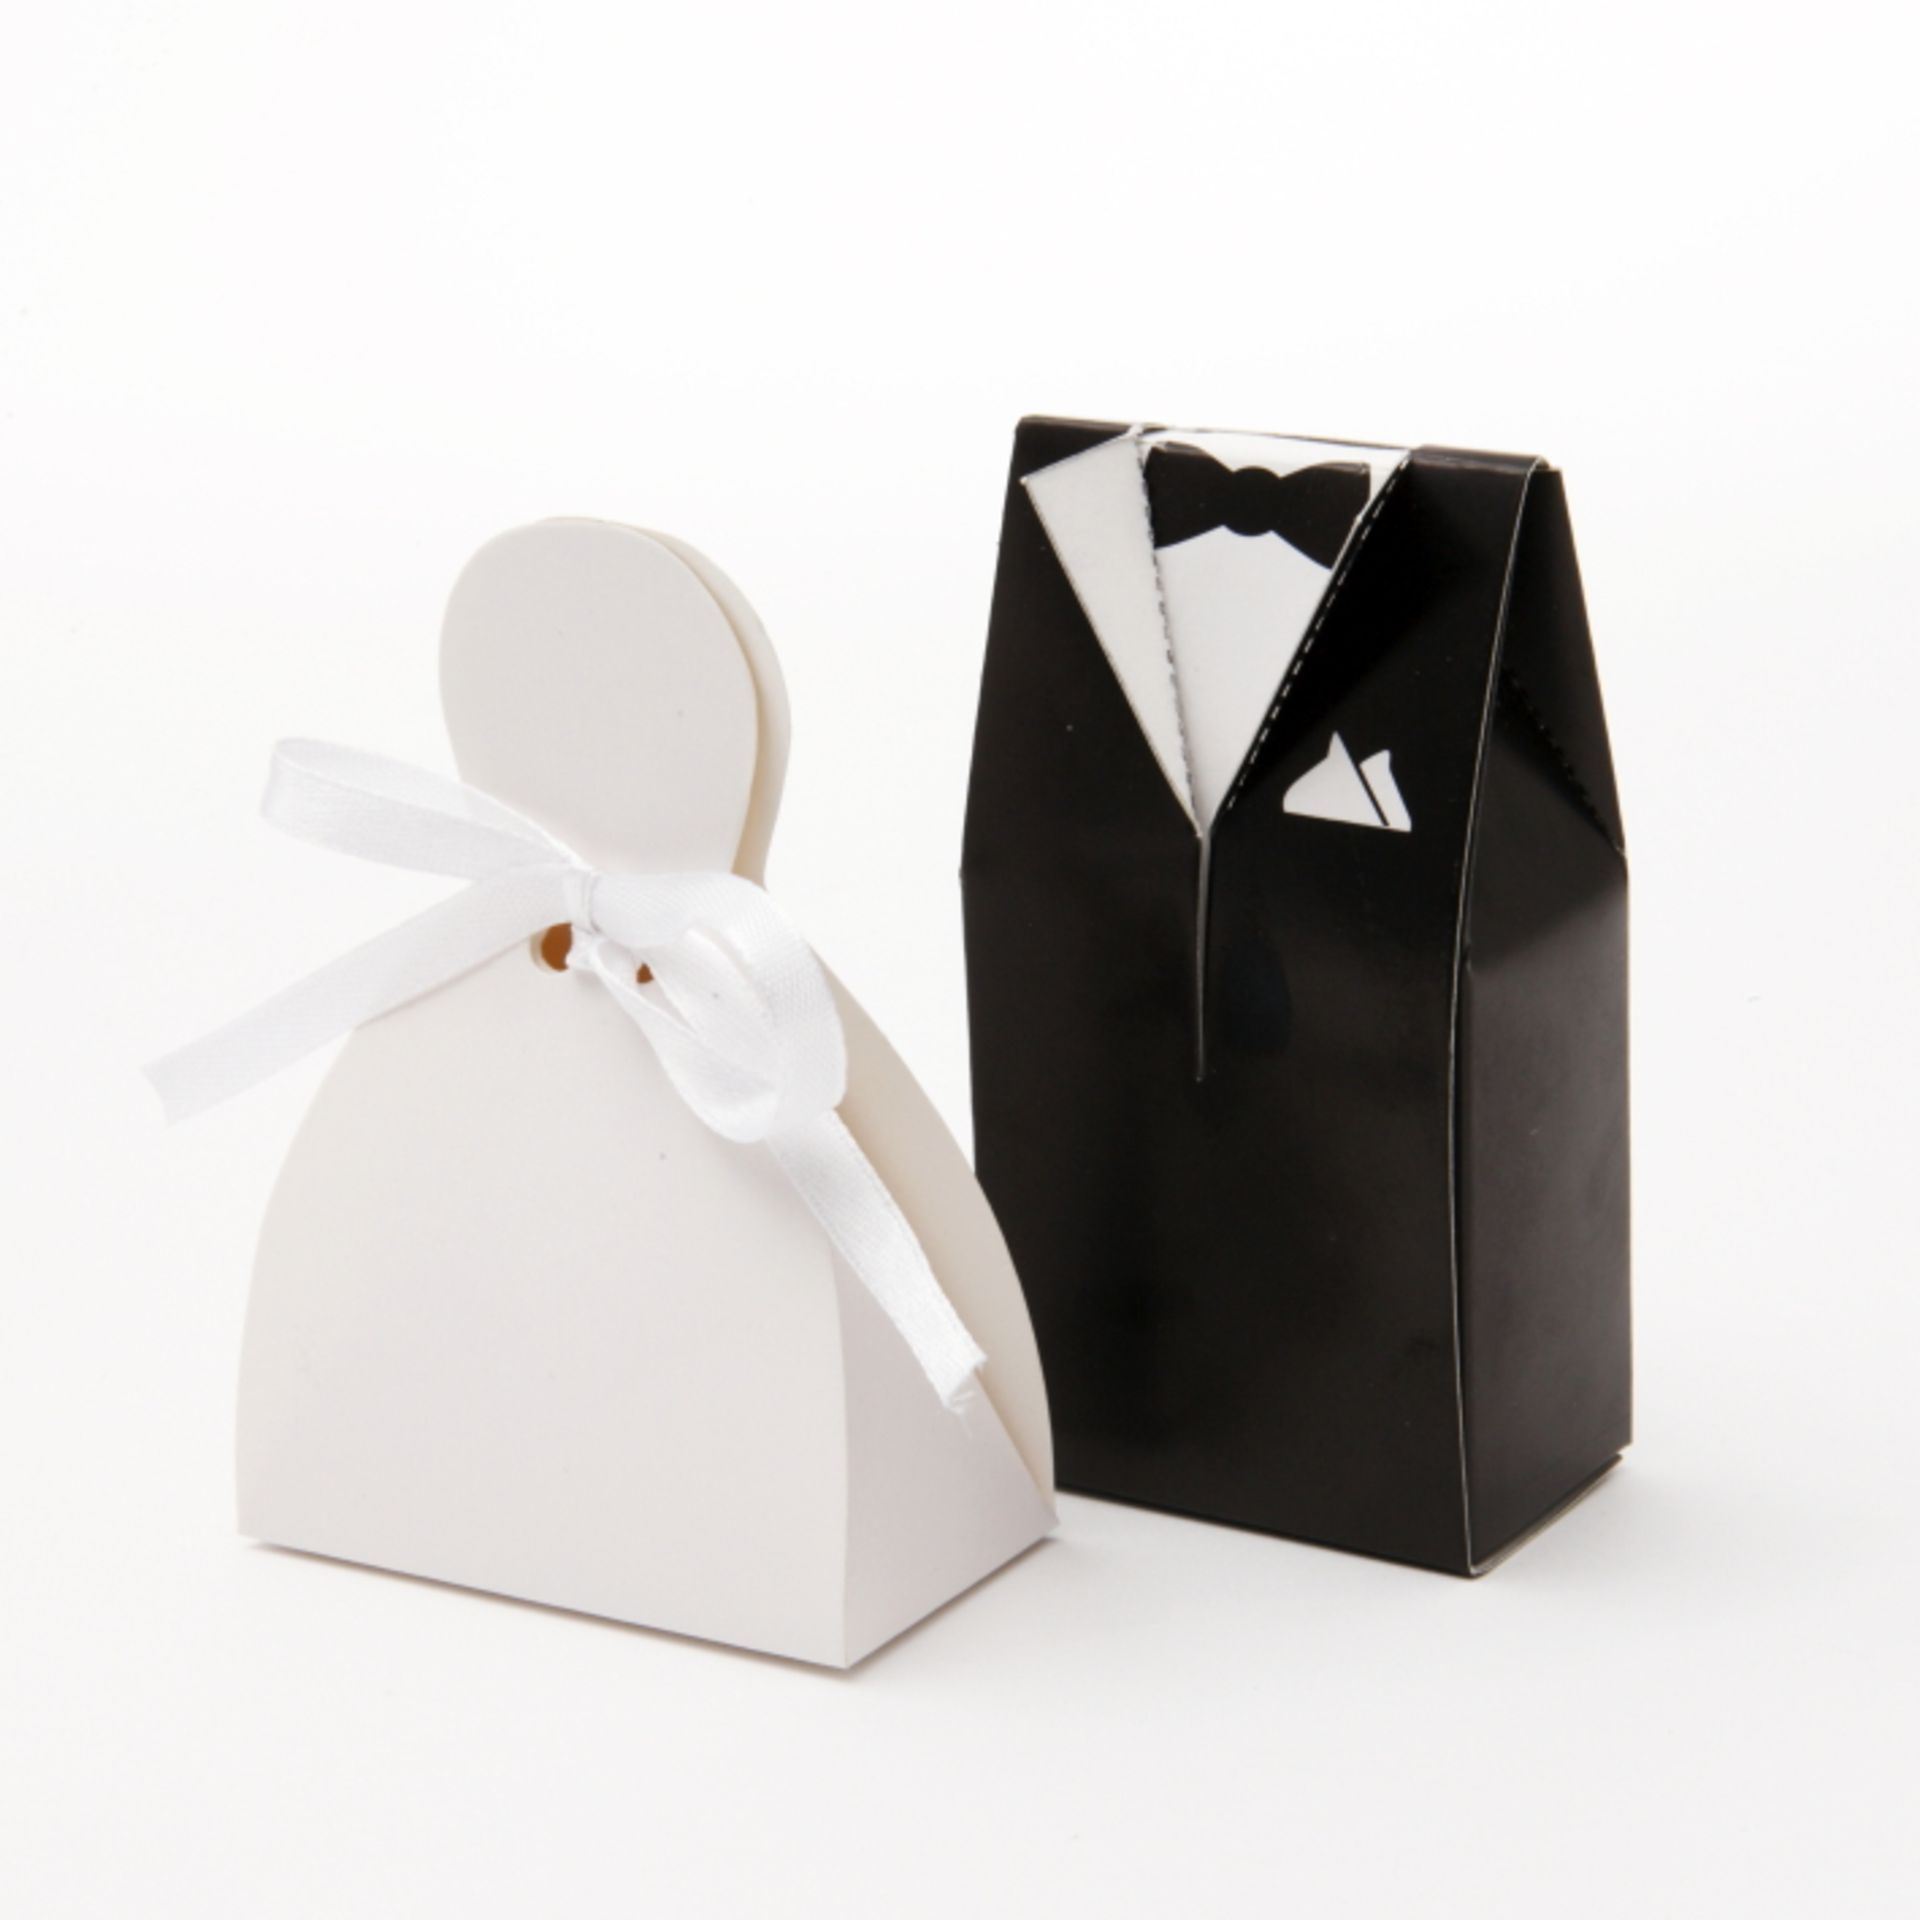 High Resale Value. Bride and Groom Wedding Favour Candy Boxes Black Tuxedo White Wedding Dress with